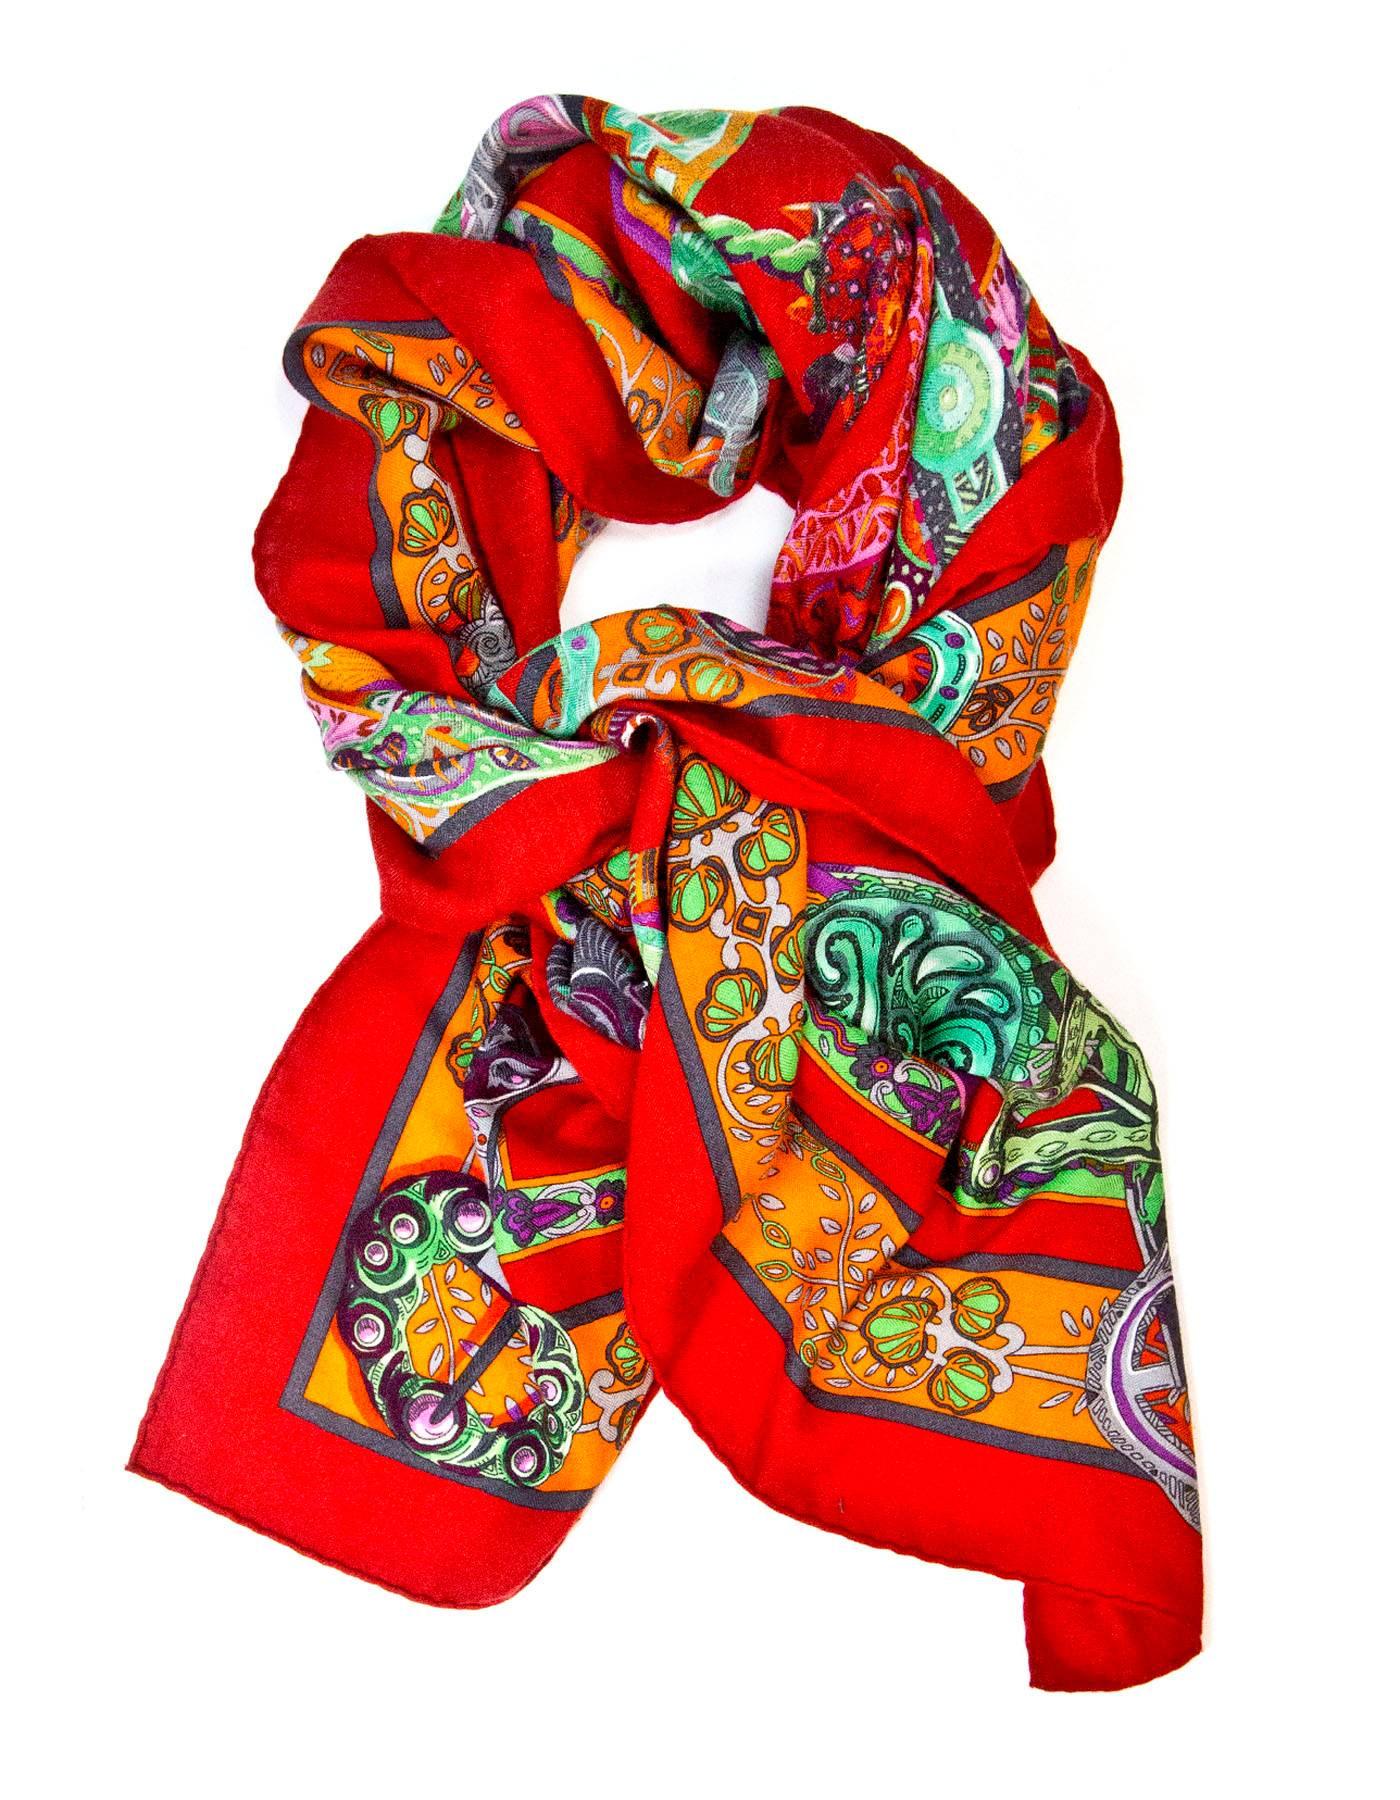 Hermes Red Cashmere & Silk Le Song a la Licorne Shawl

Made In: France
Color: Red, multi
Materials: 65% cashmere, 35% silk
Retail Price: $1,100 + tax
Overall Condition: Excellent pre-owned condition 

Measurements:
Length: 50"
Width: